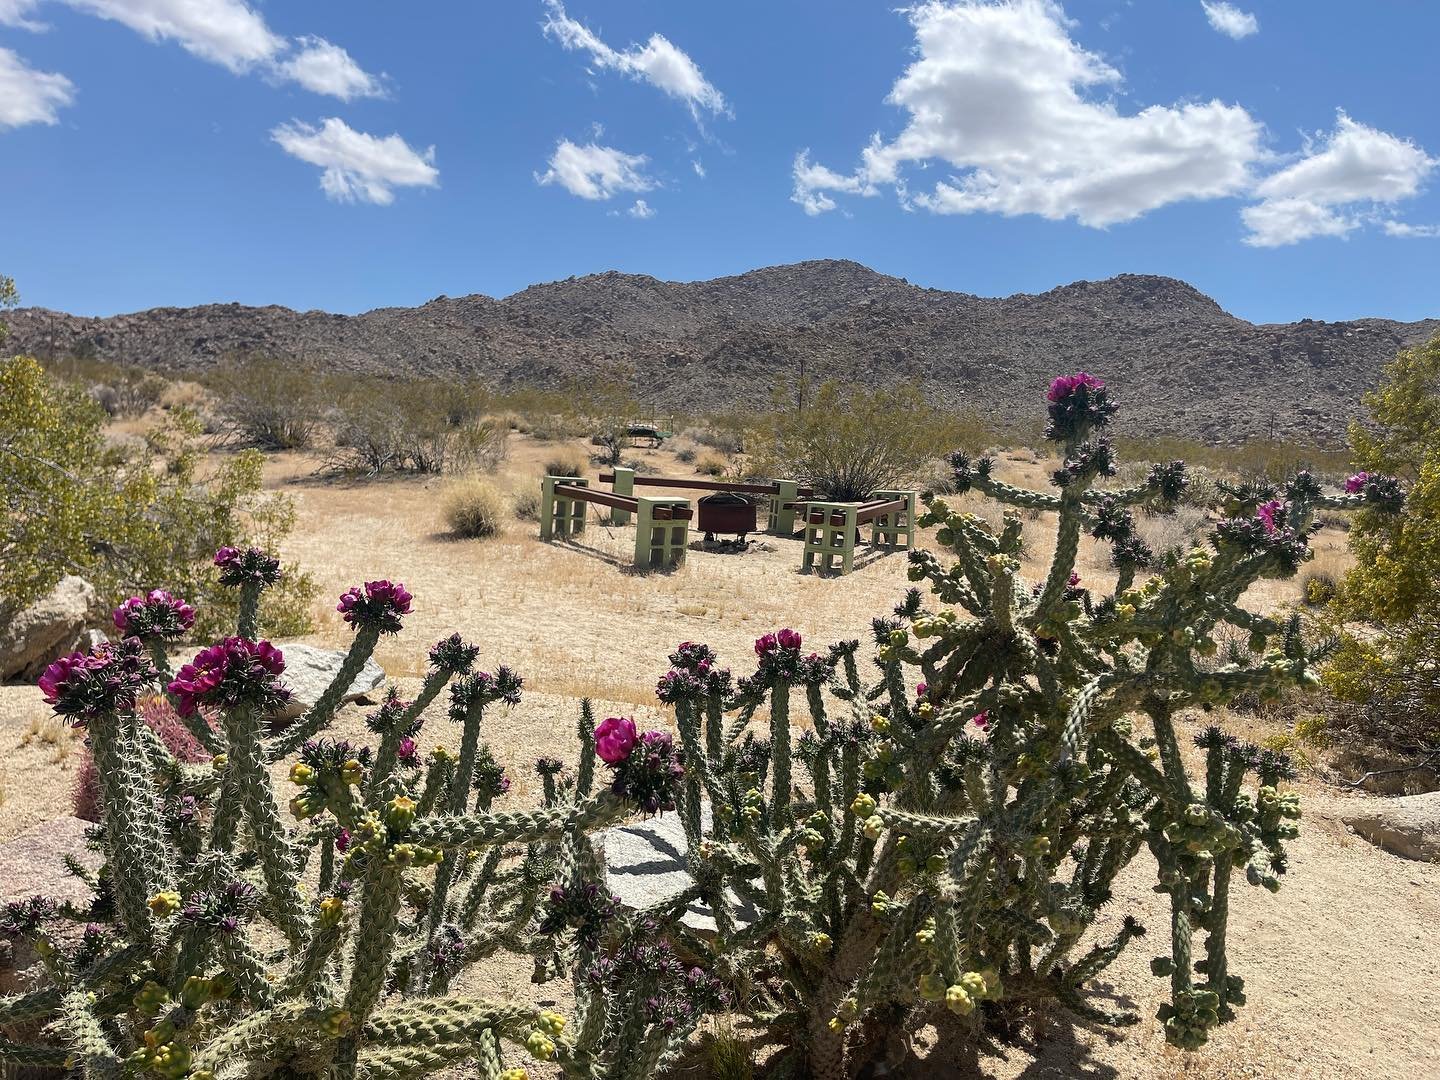 Cactus blooms a plenty!  So many flowers and buds ready to smile at you.  Book your stay and watch the magic! 

#desertbreezeoasis #twentyninepalms #visit29palms #joshuatreenationalpark #cacti #cactus #jtvh #jtnp

Planning your visit? Follow us or DM